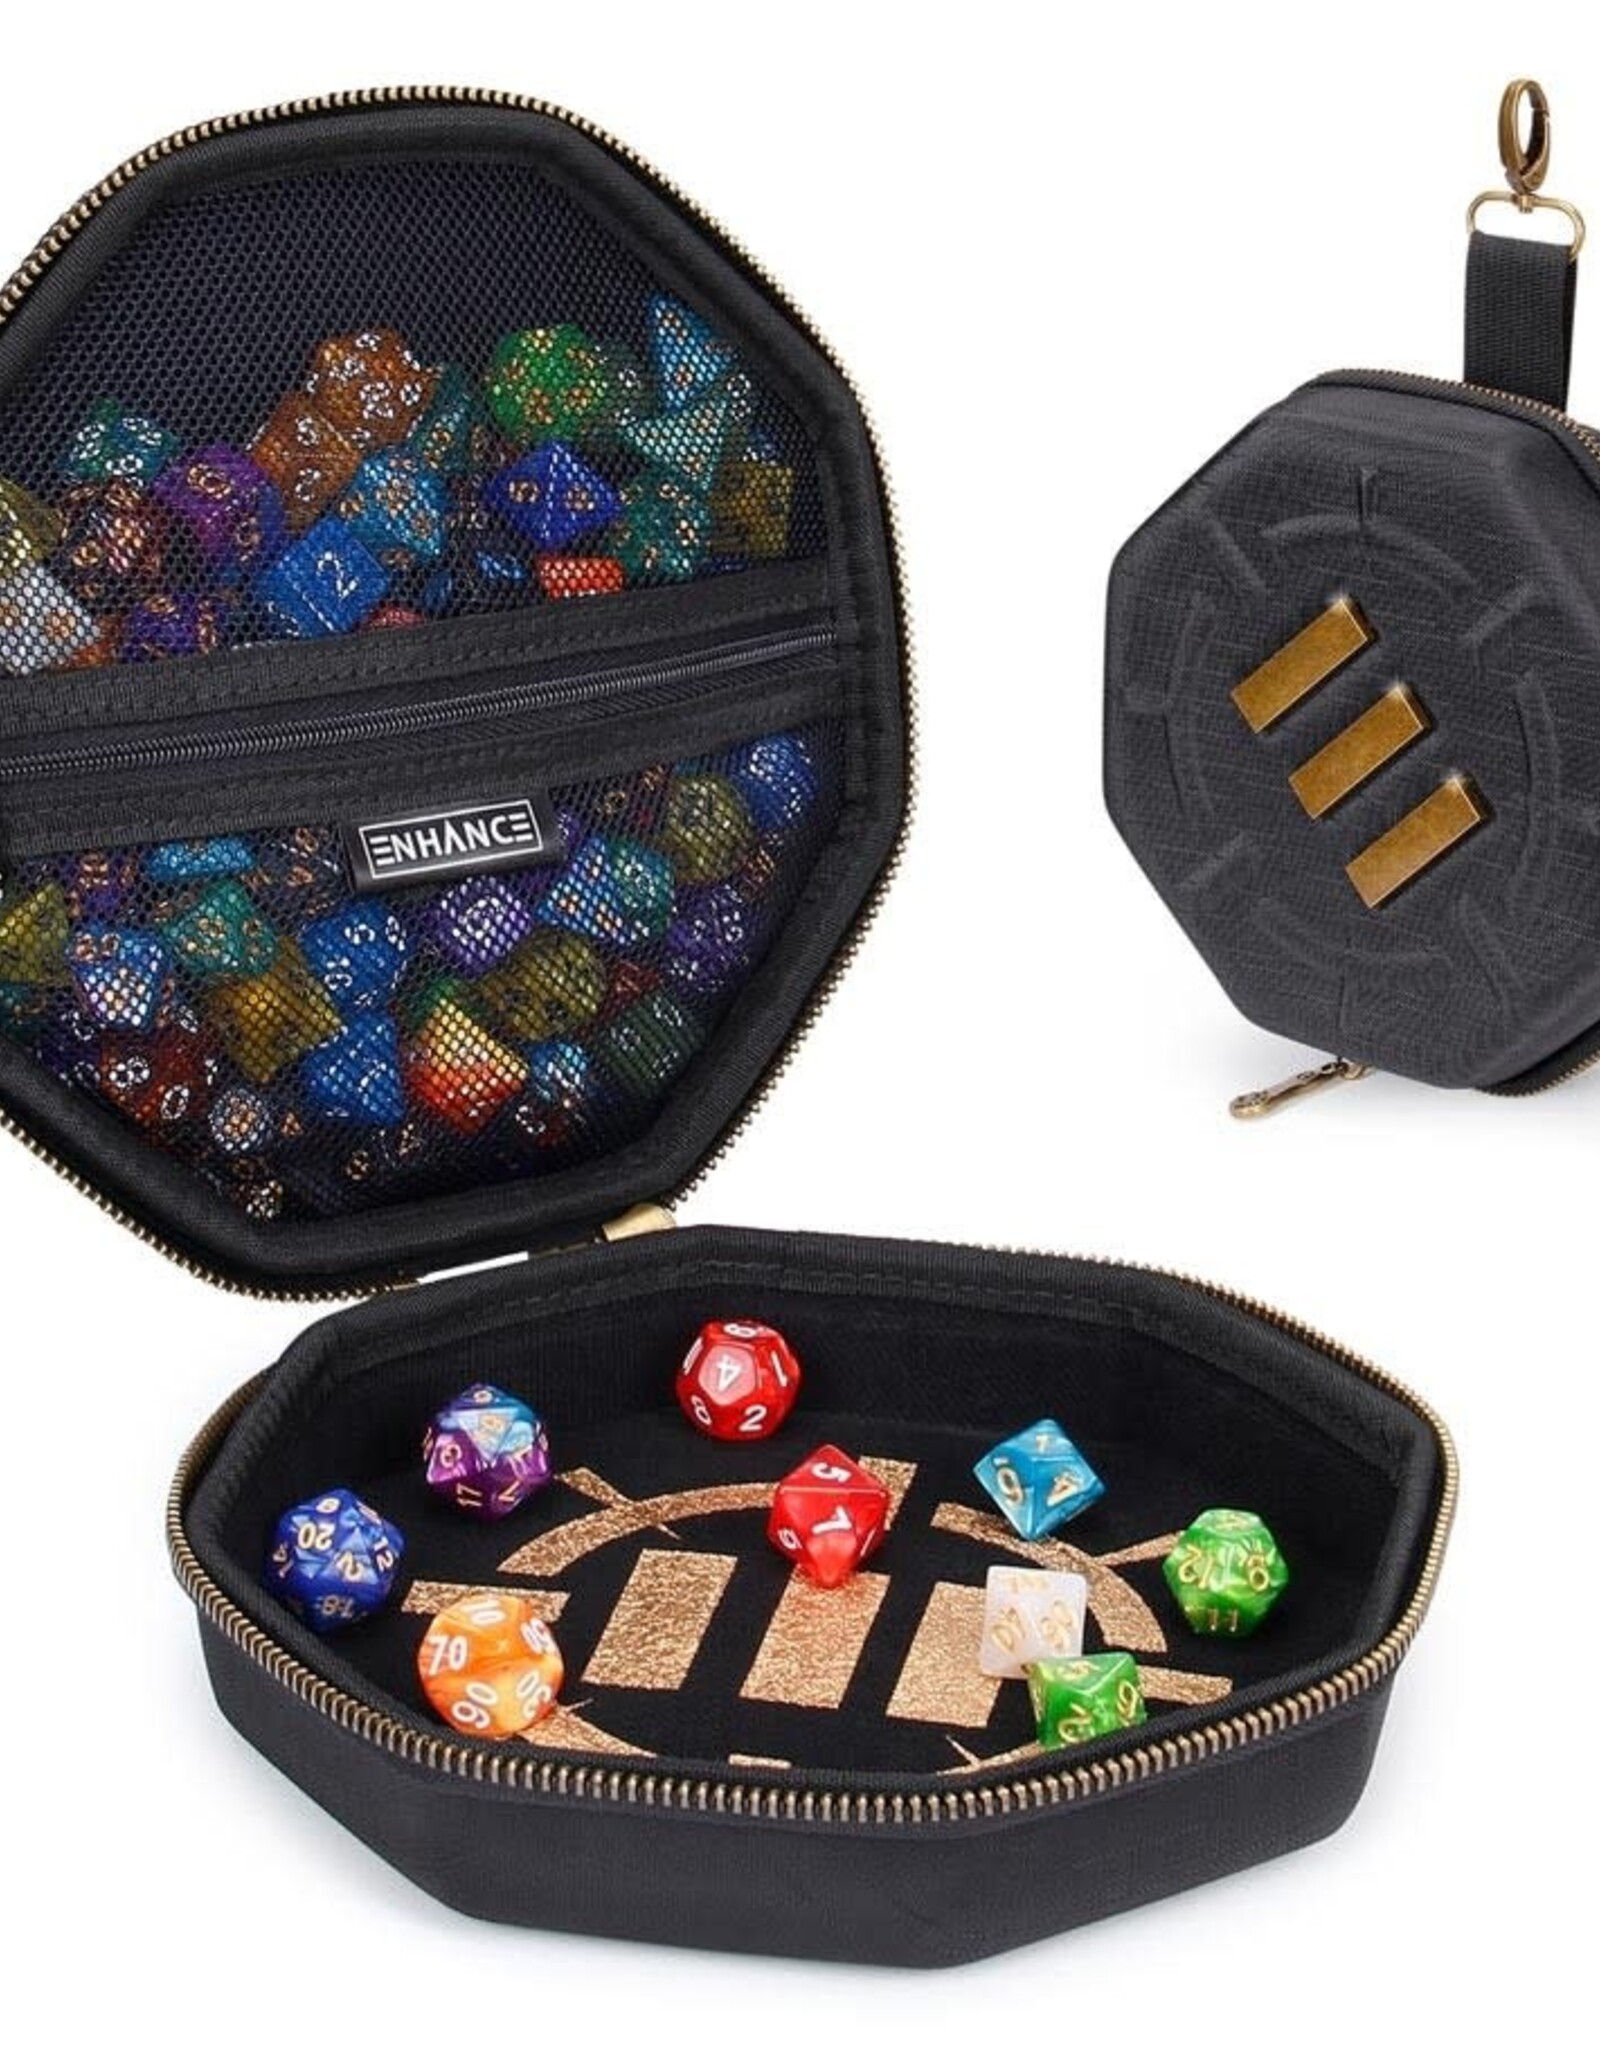 Misc Enhance: Dice Case & Rolling Tray